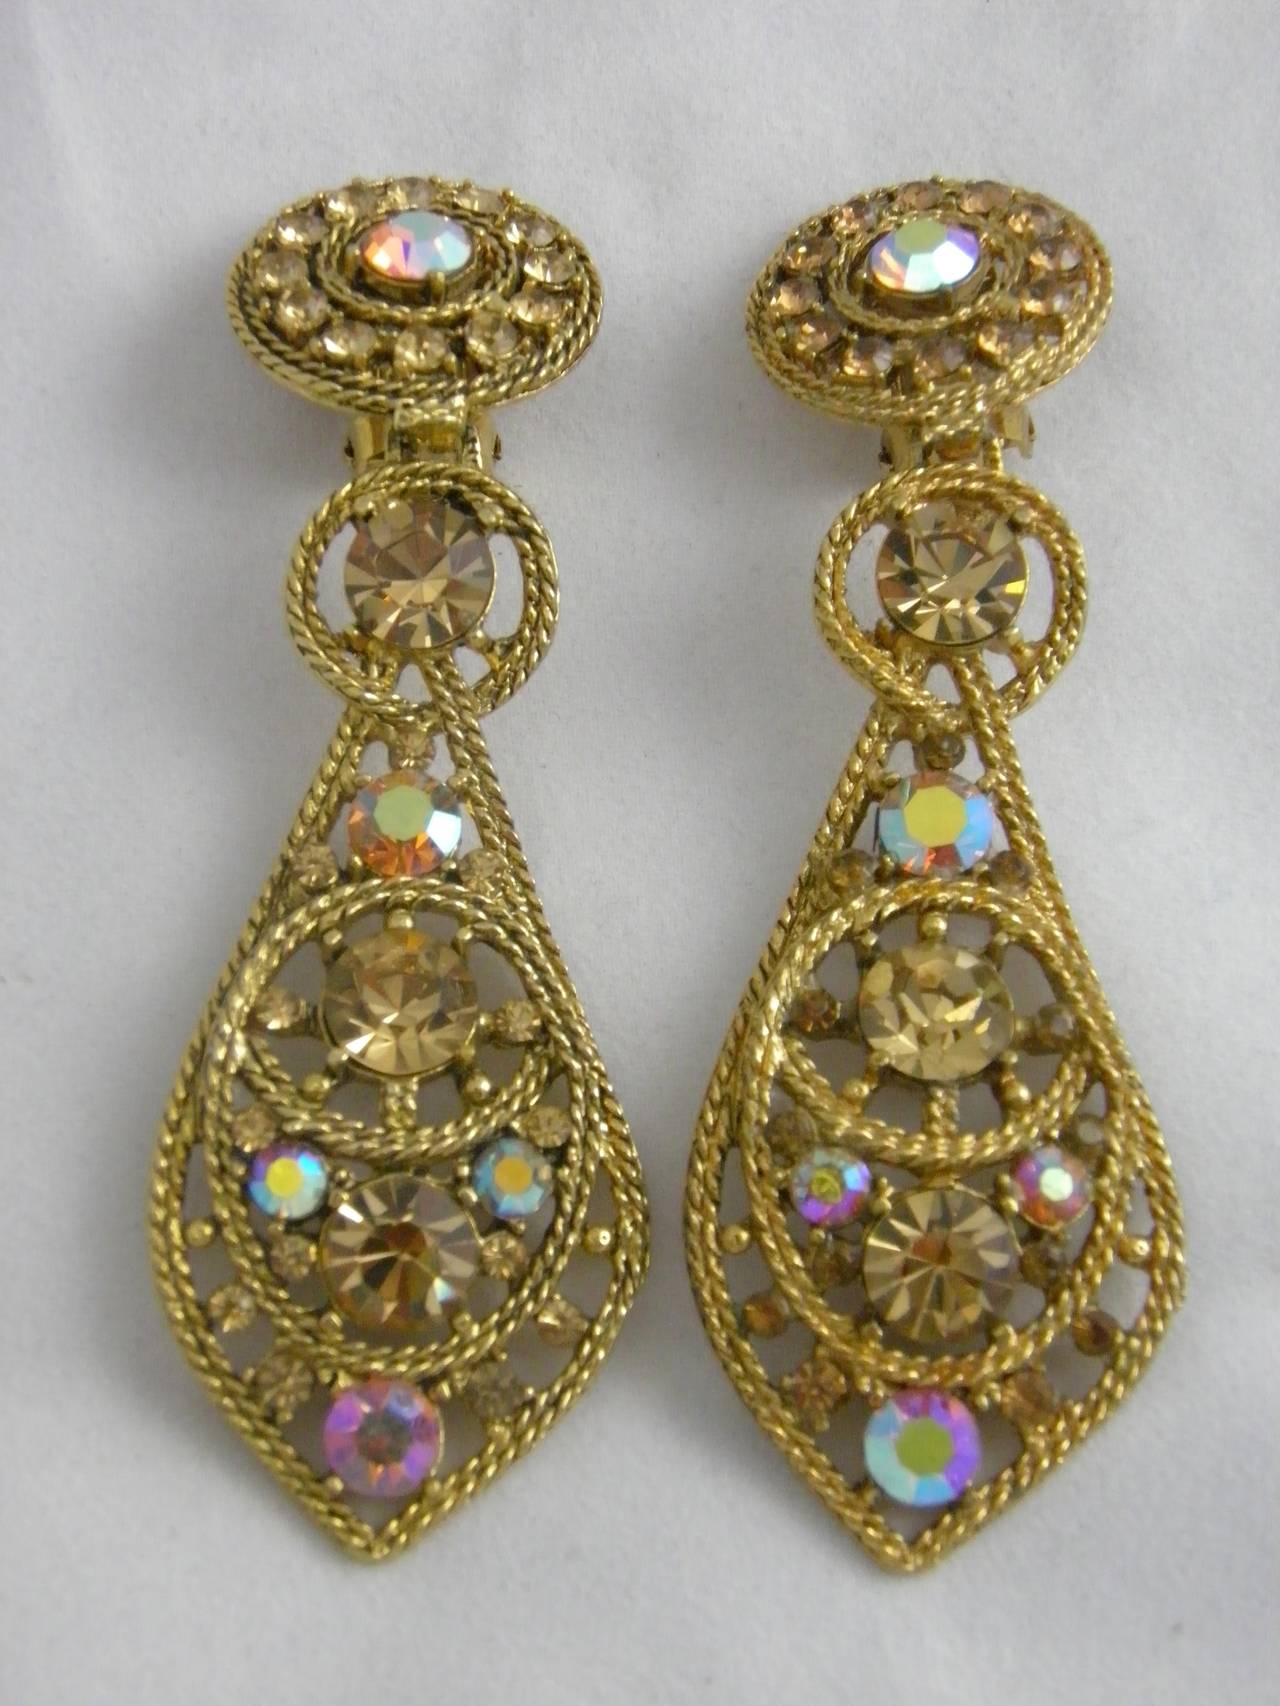 Glam Thelma Deutsch Pendant Earrings with Amber Aurora Borealis Stones In Excellent Condition For Sale In West Palm Beach, FL